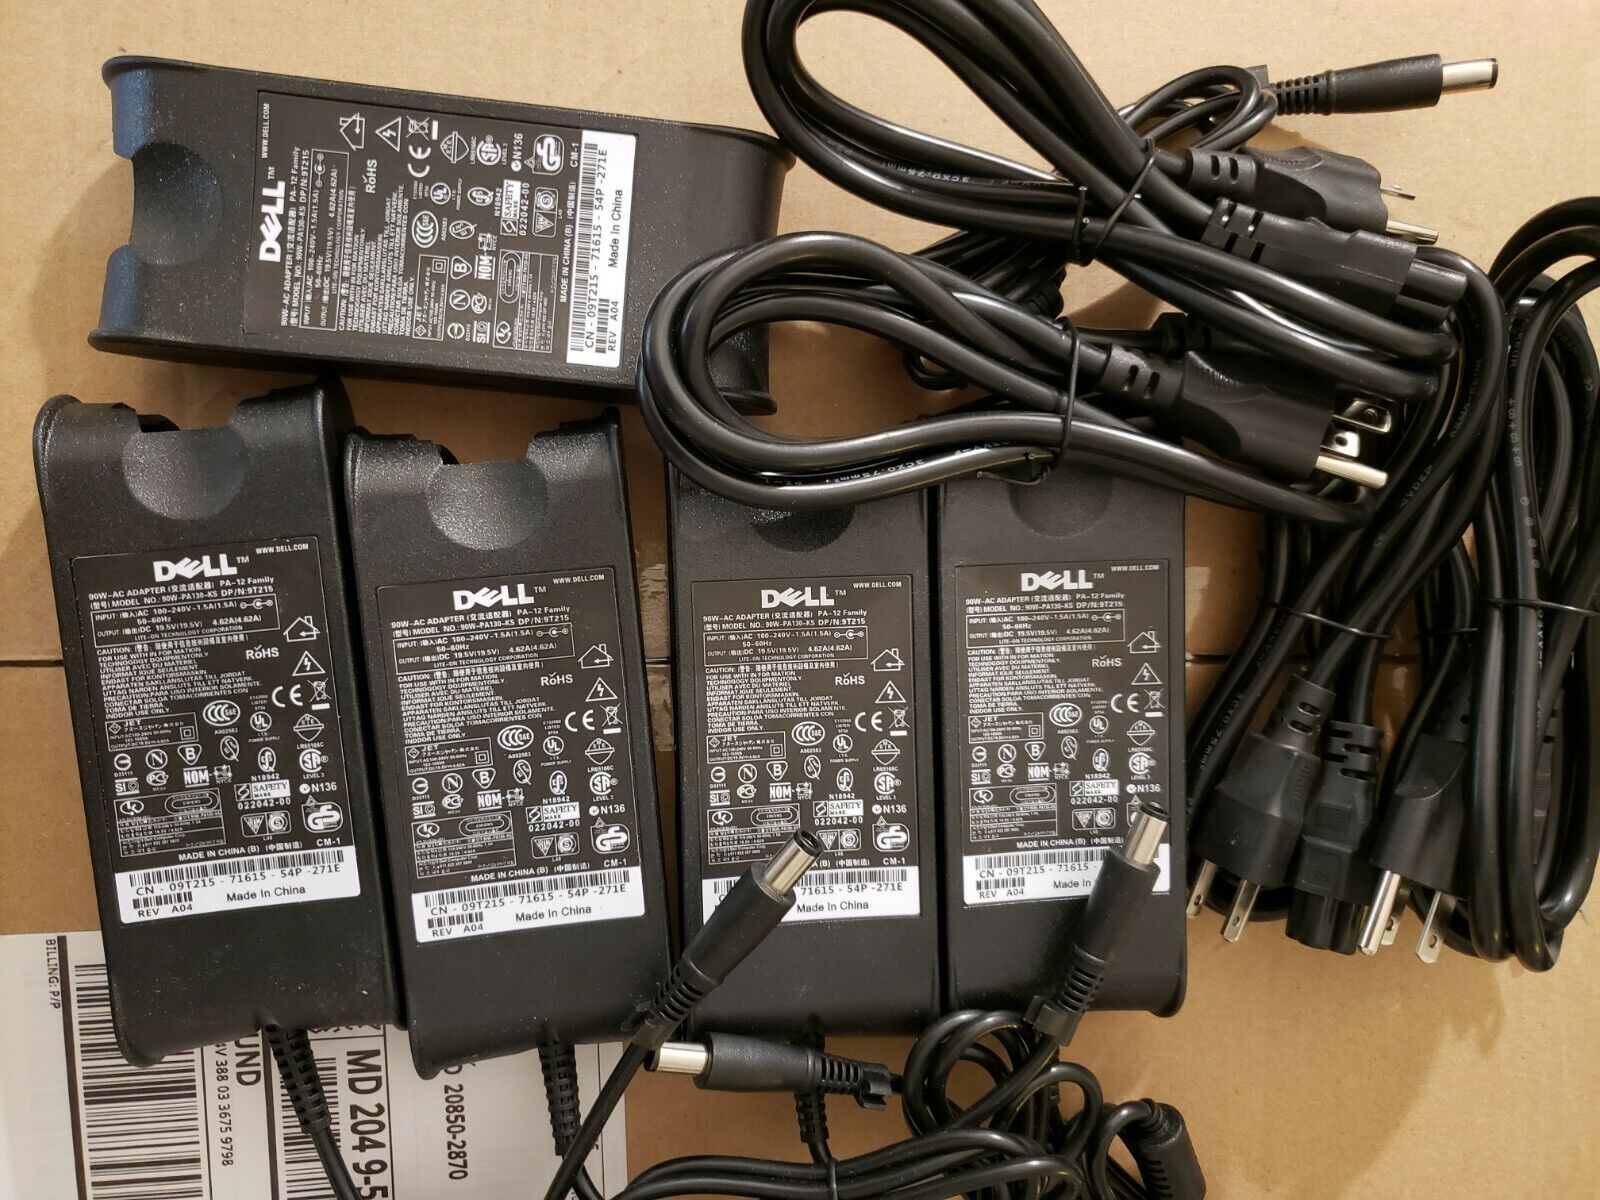 🔥Lot of 5 laptop charger power adapters 90w 19.5v 4.62A for dell old laptops🔥